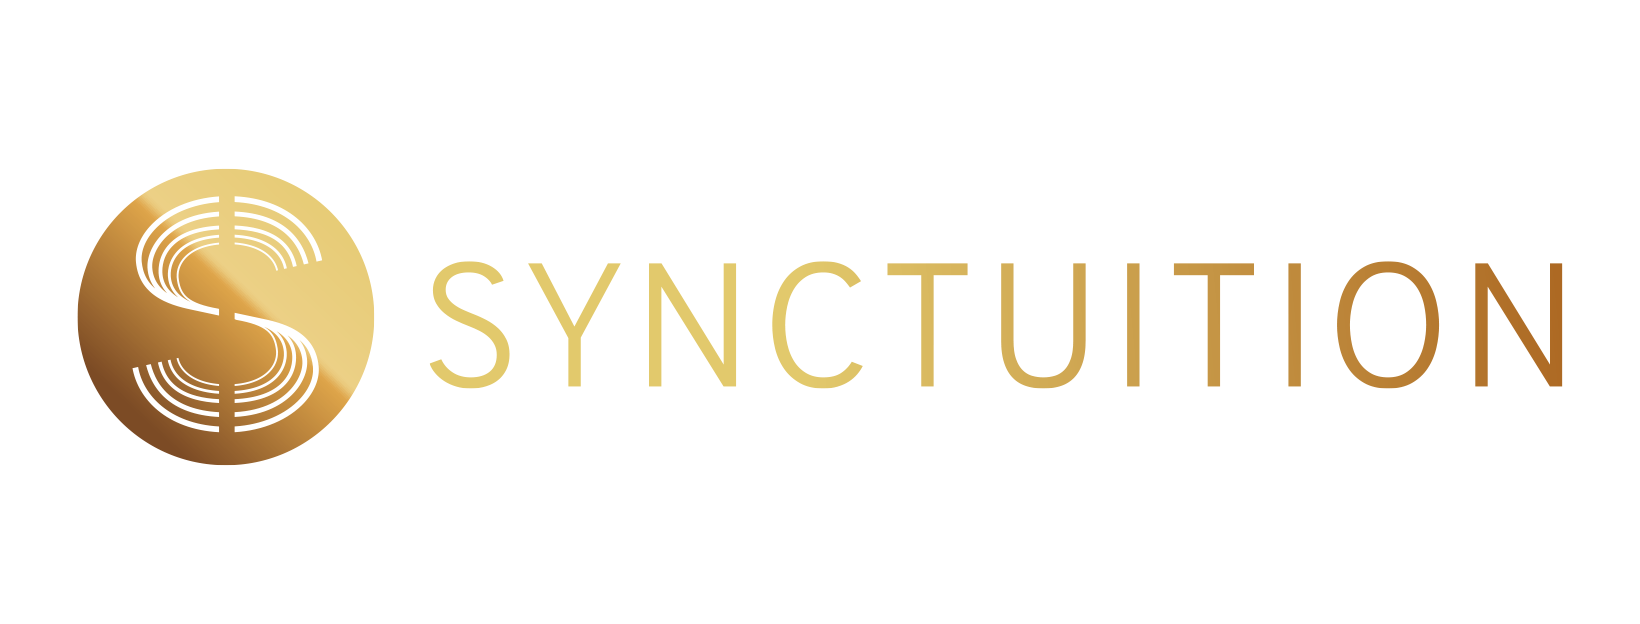 Synctuition logo 2018 1